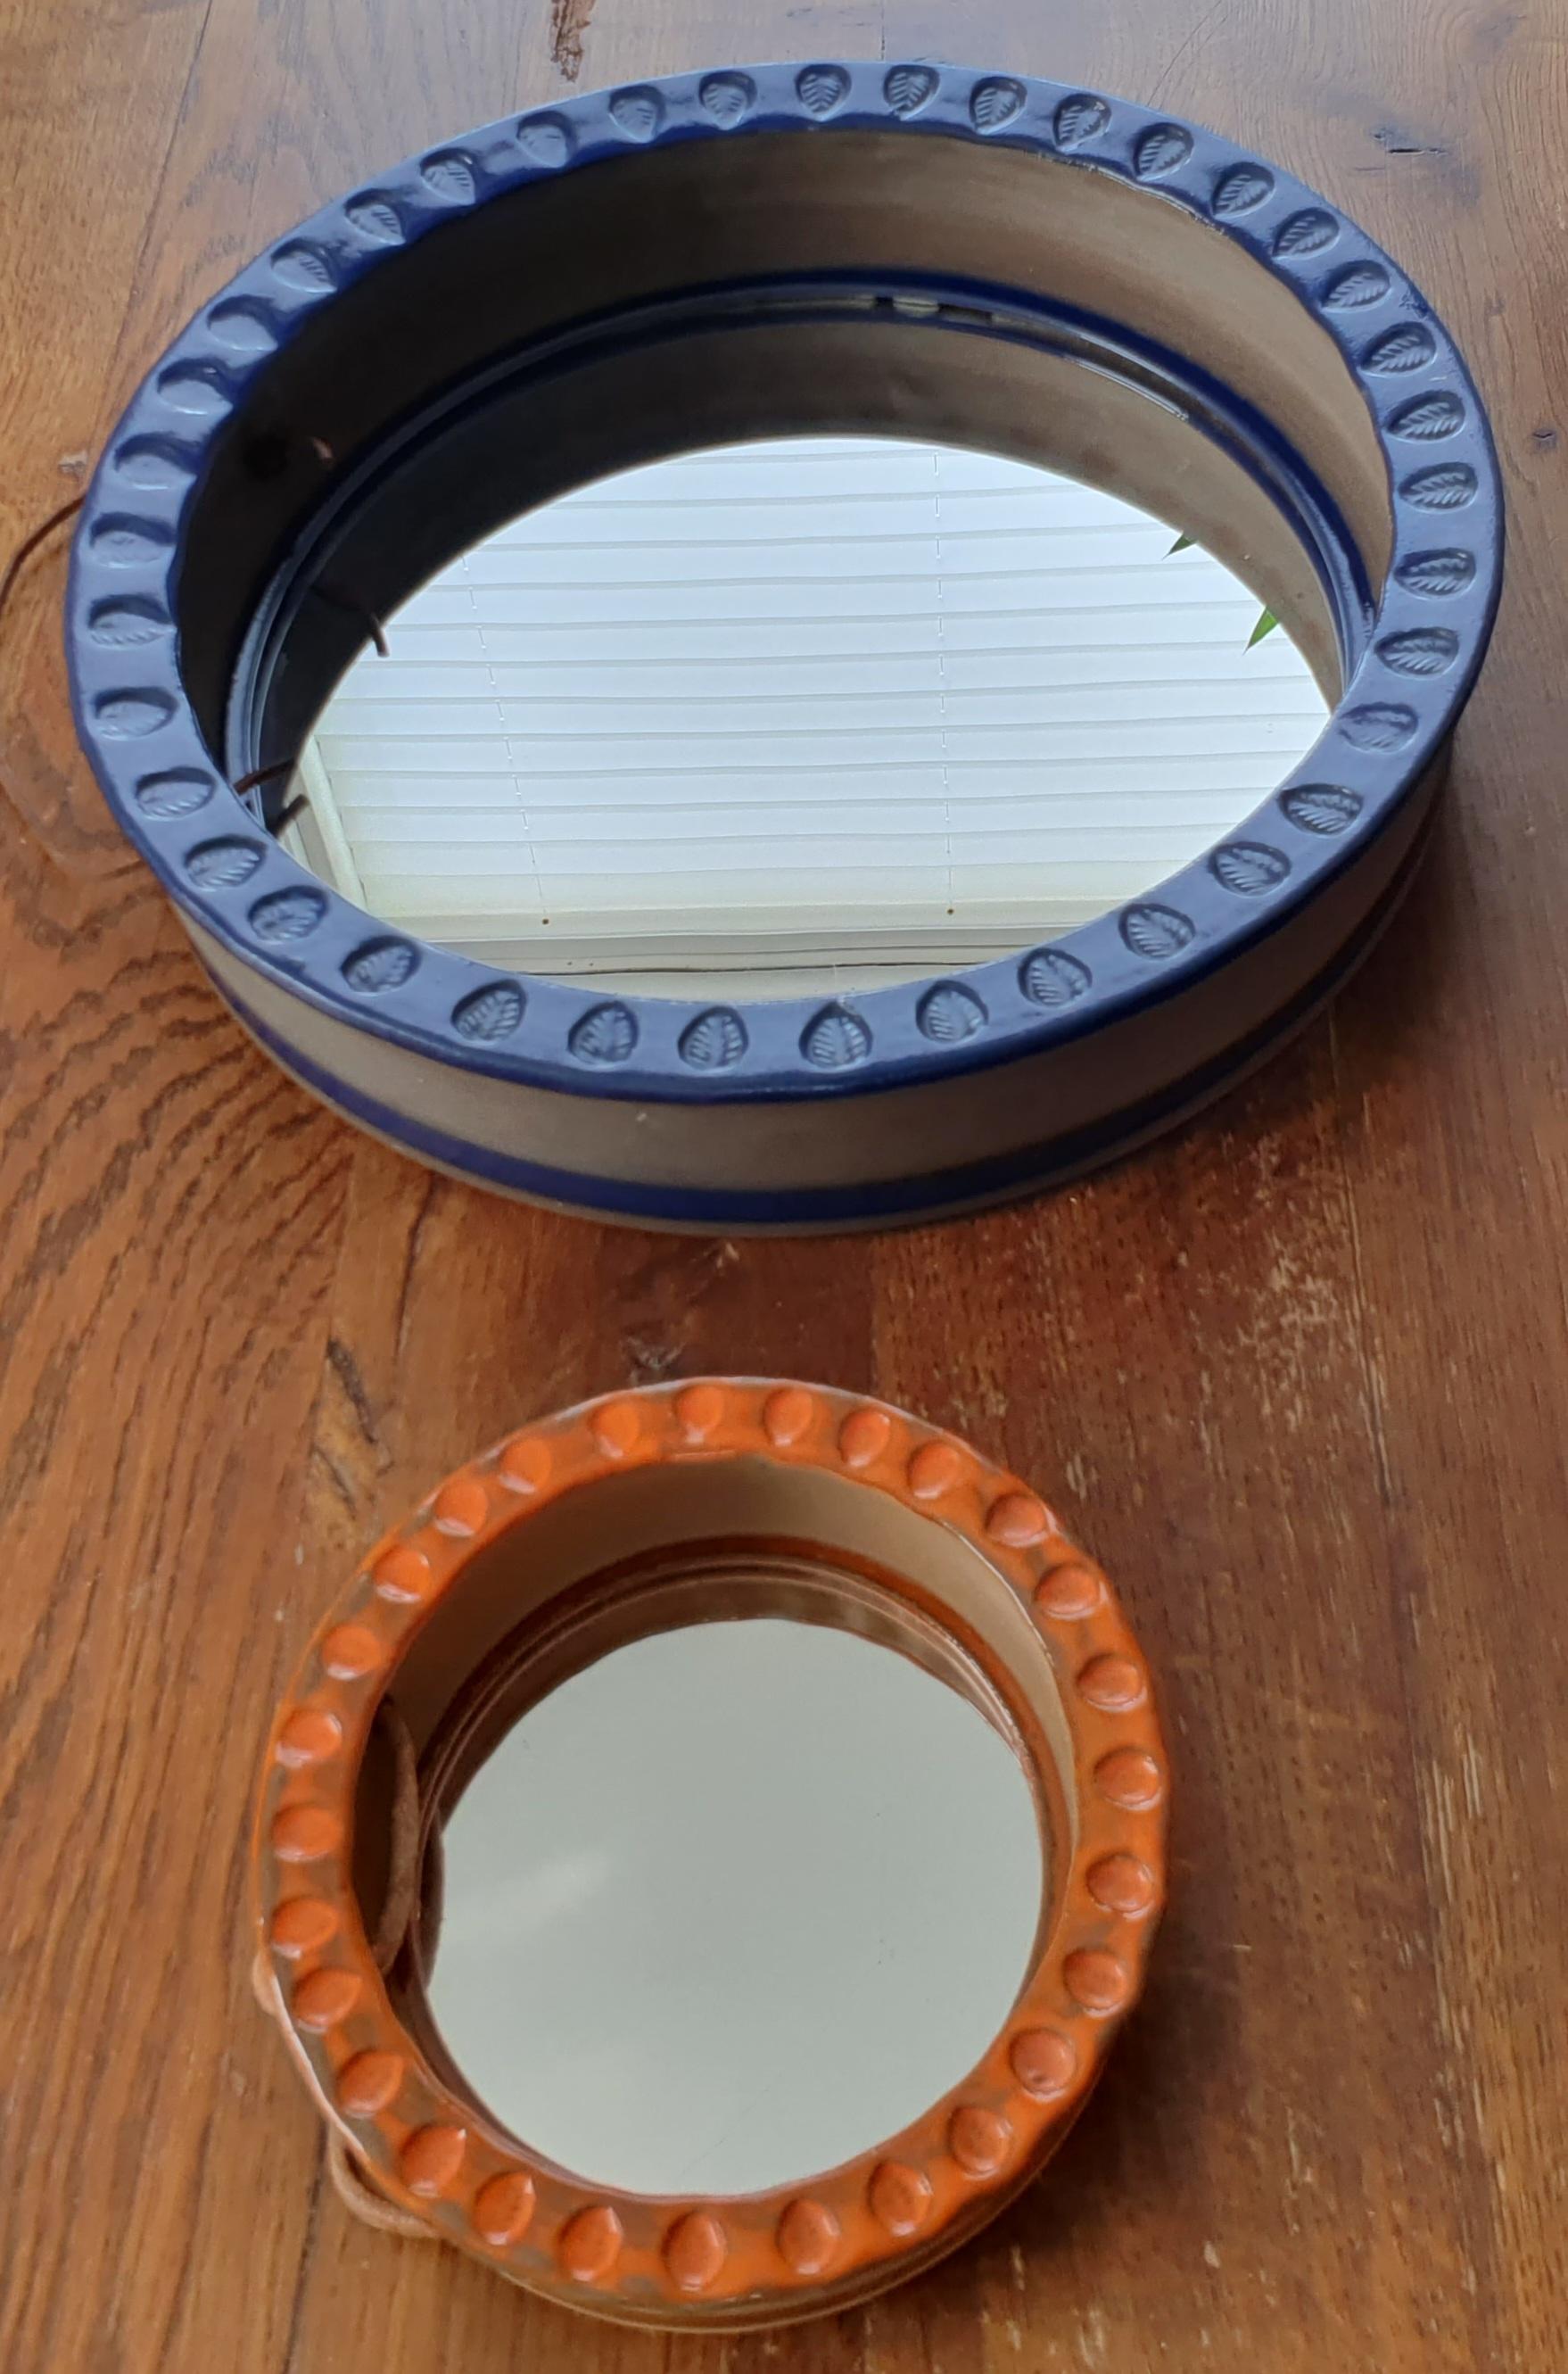 Two round ceramic mirrors by Danish Klavs Encke. Brown ceramic with strong blue and orange glaze. Blue large mirror measures 31 cm in diameter and is 6 cm high. Smaller orange mirror measures 14,5 cm in diameter and is 3,5 cm high. With leather